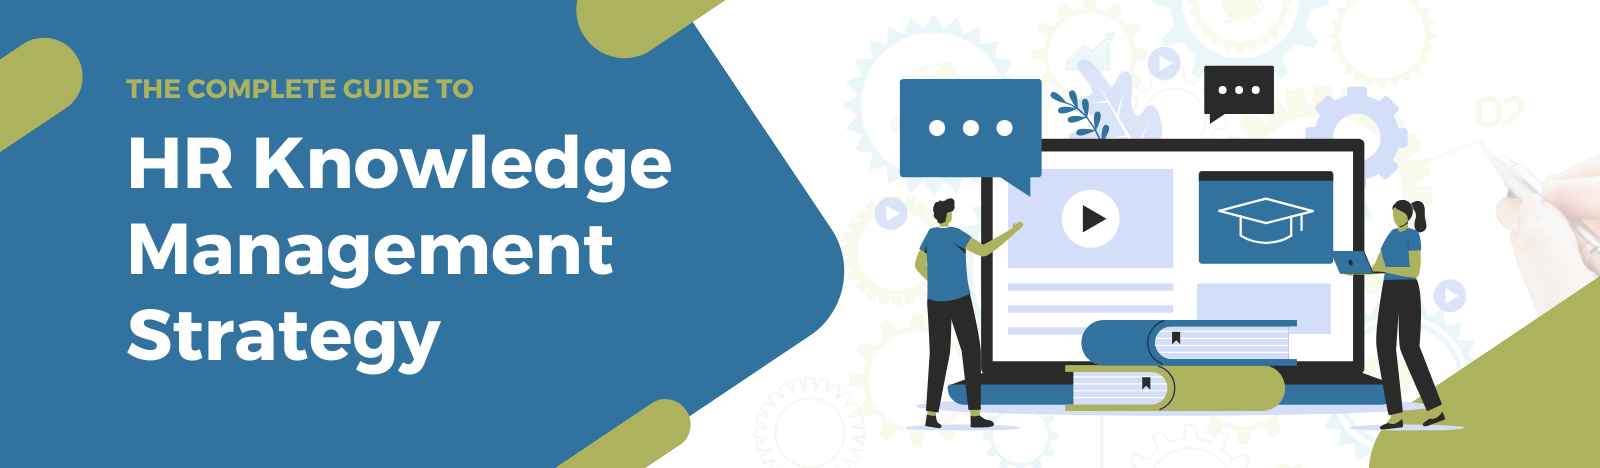 The Complete Guide to HR Knowledge Management Strategy